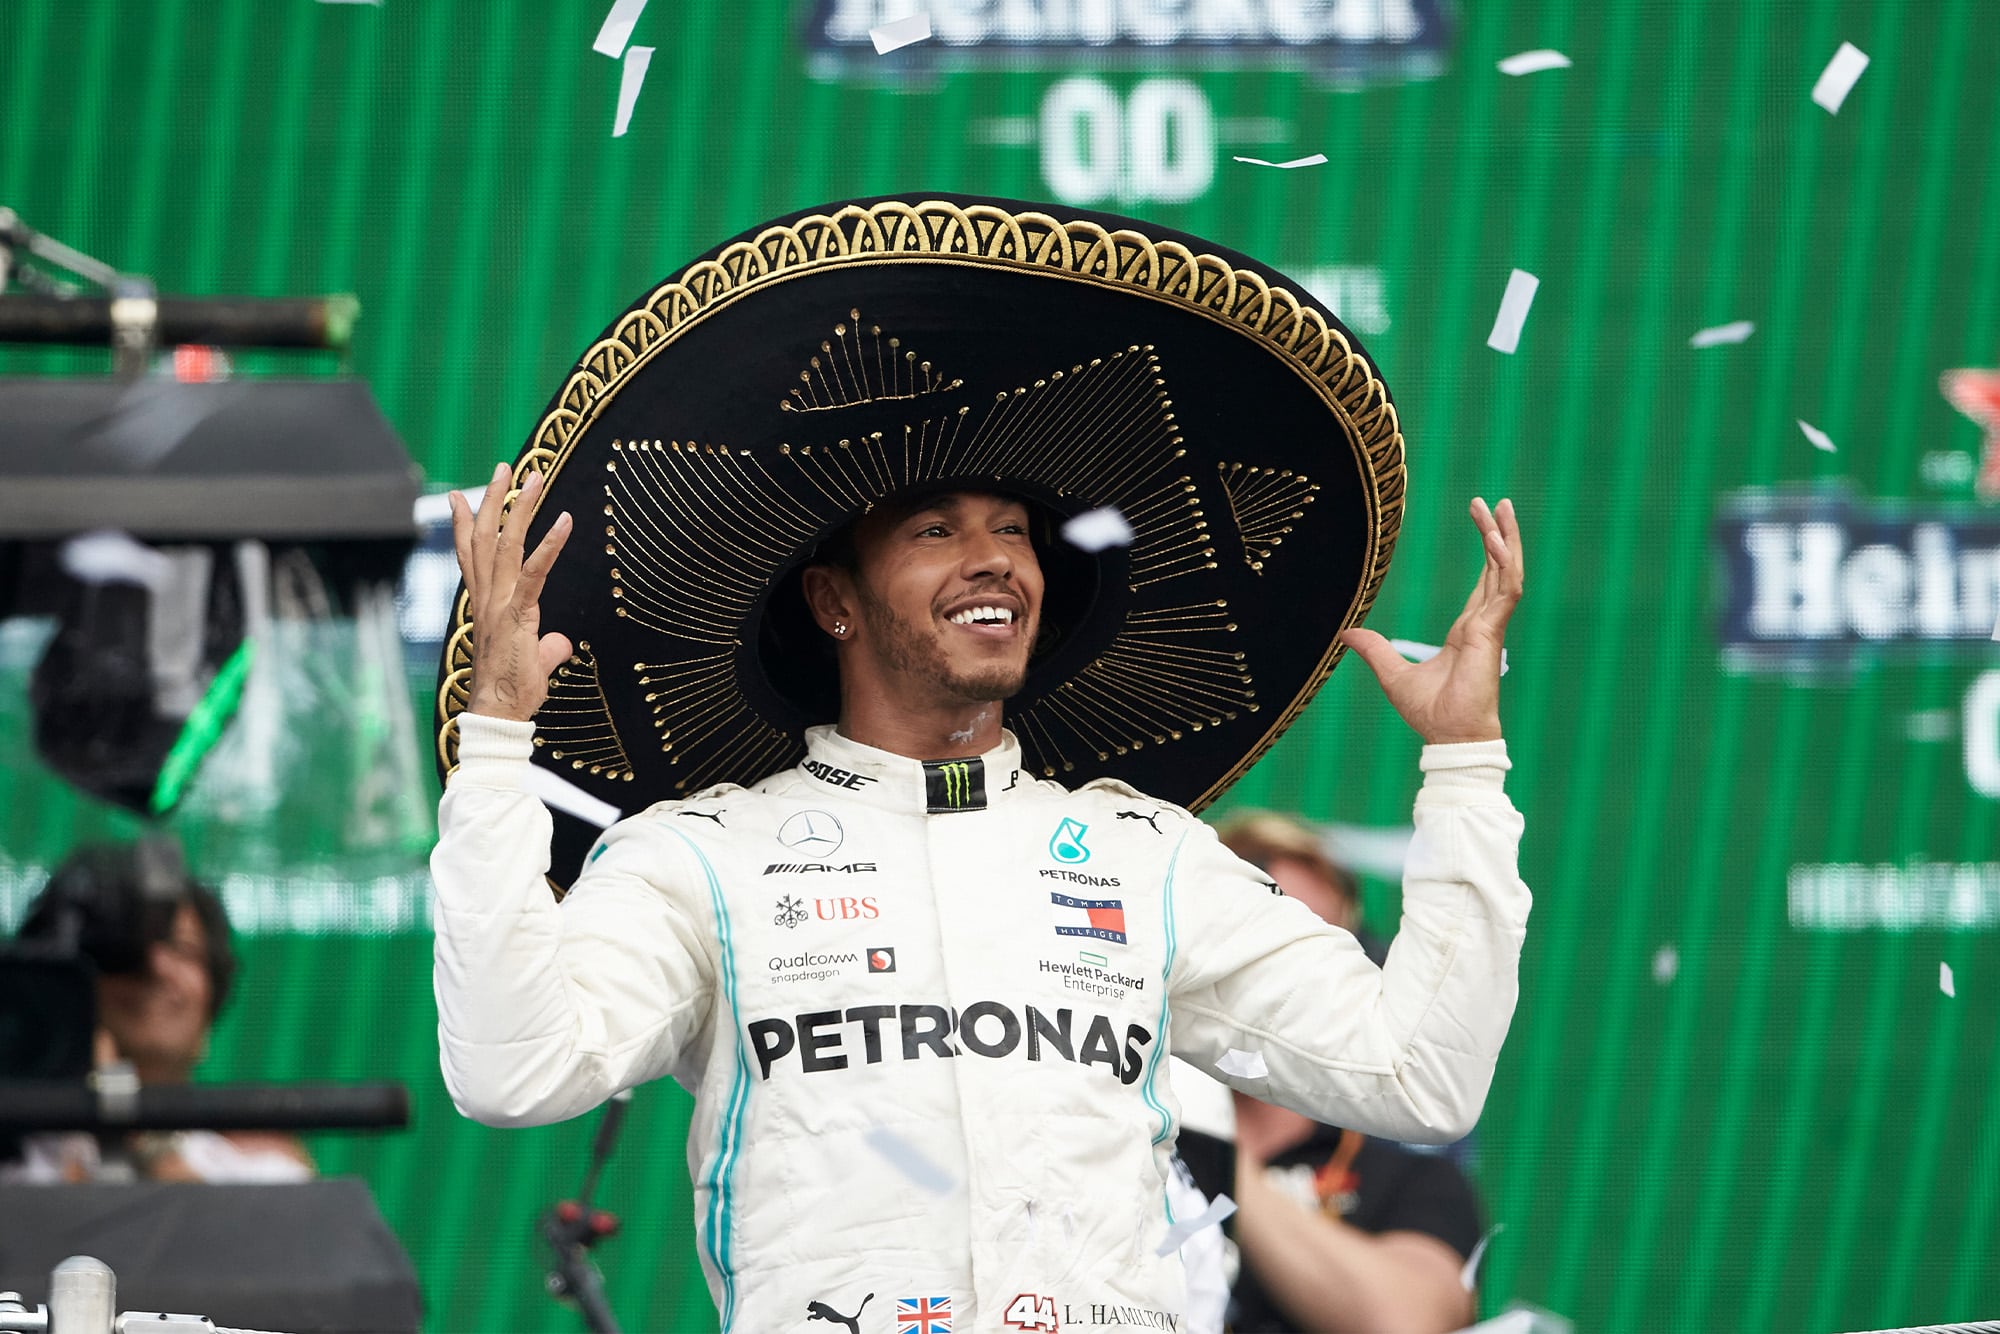 Lewis Hamilton celebrates in his sombrero after winning the 2019 Mexican Grand Prix